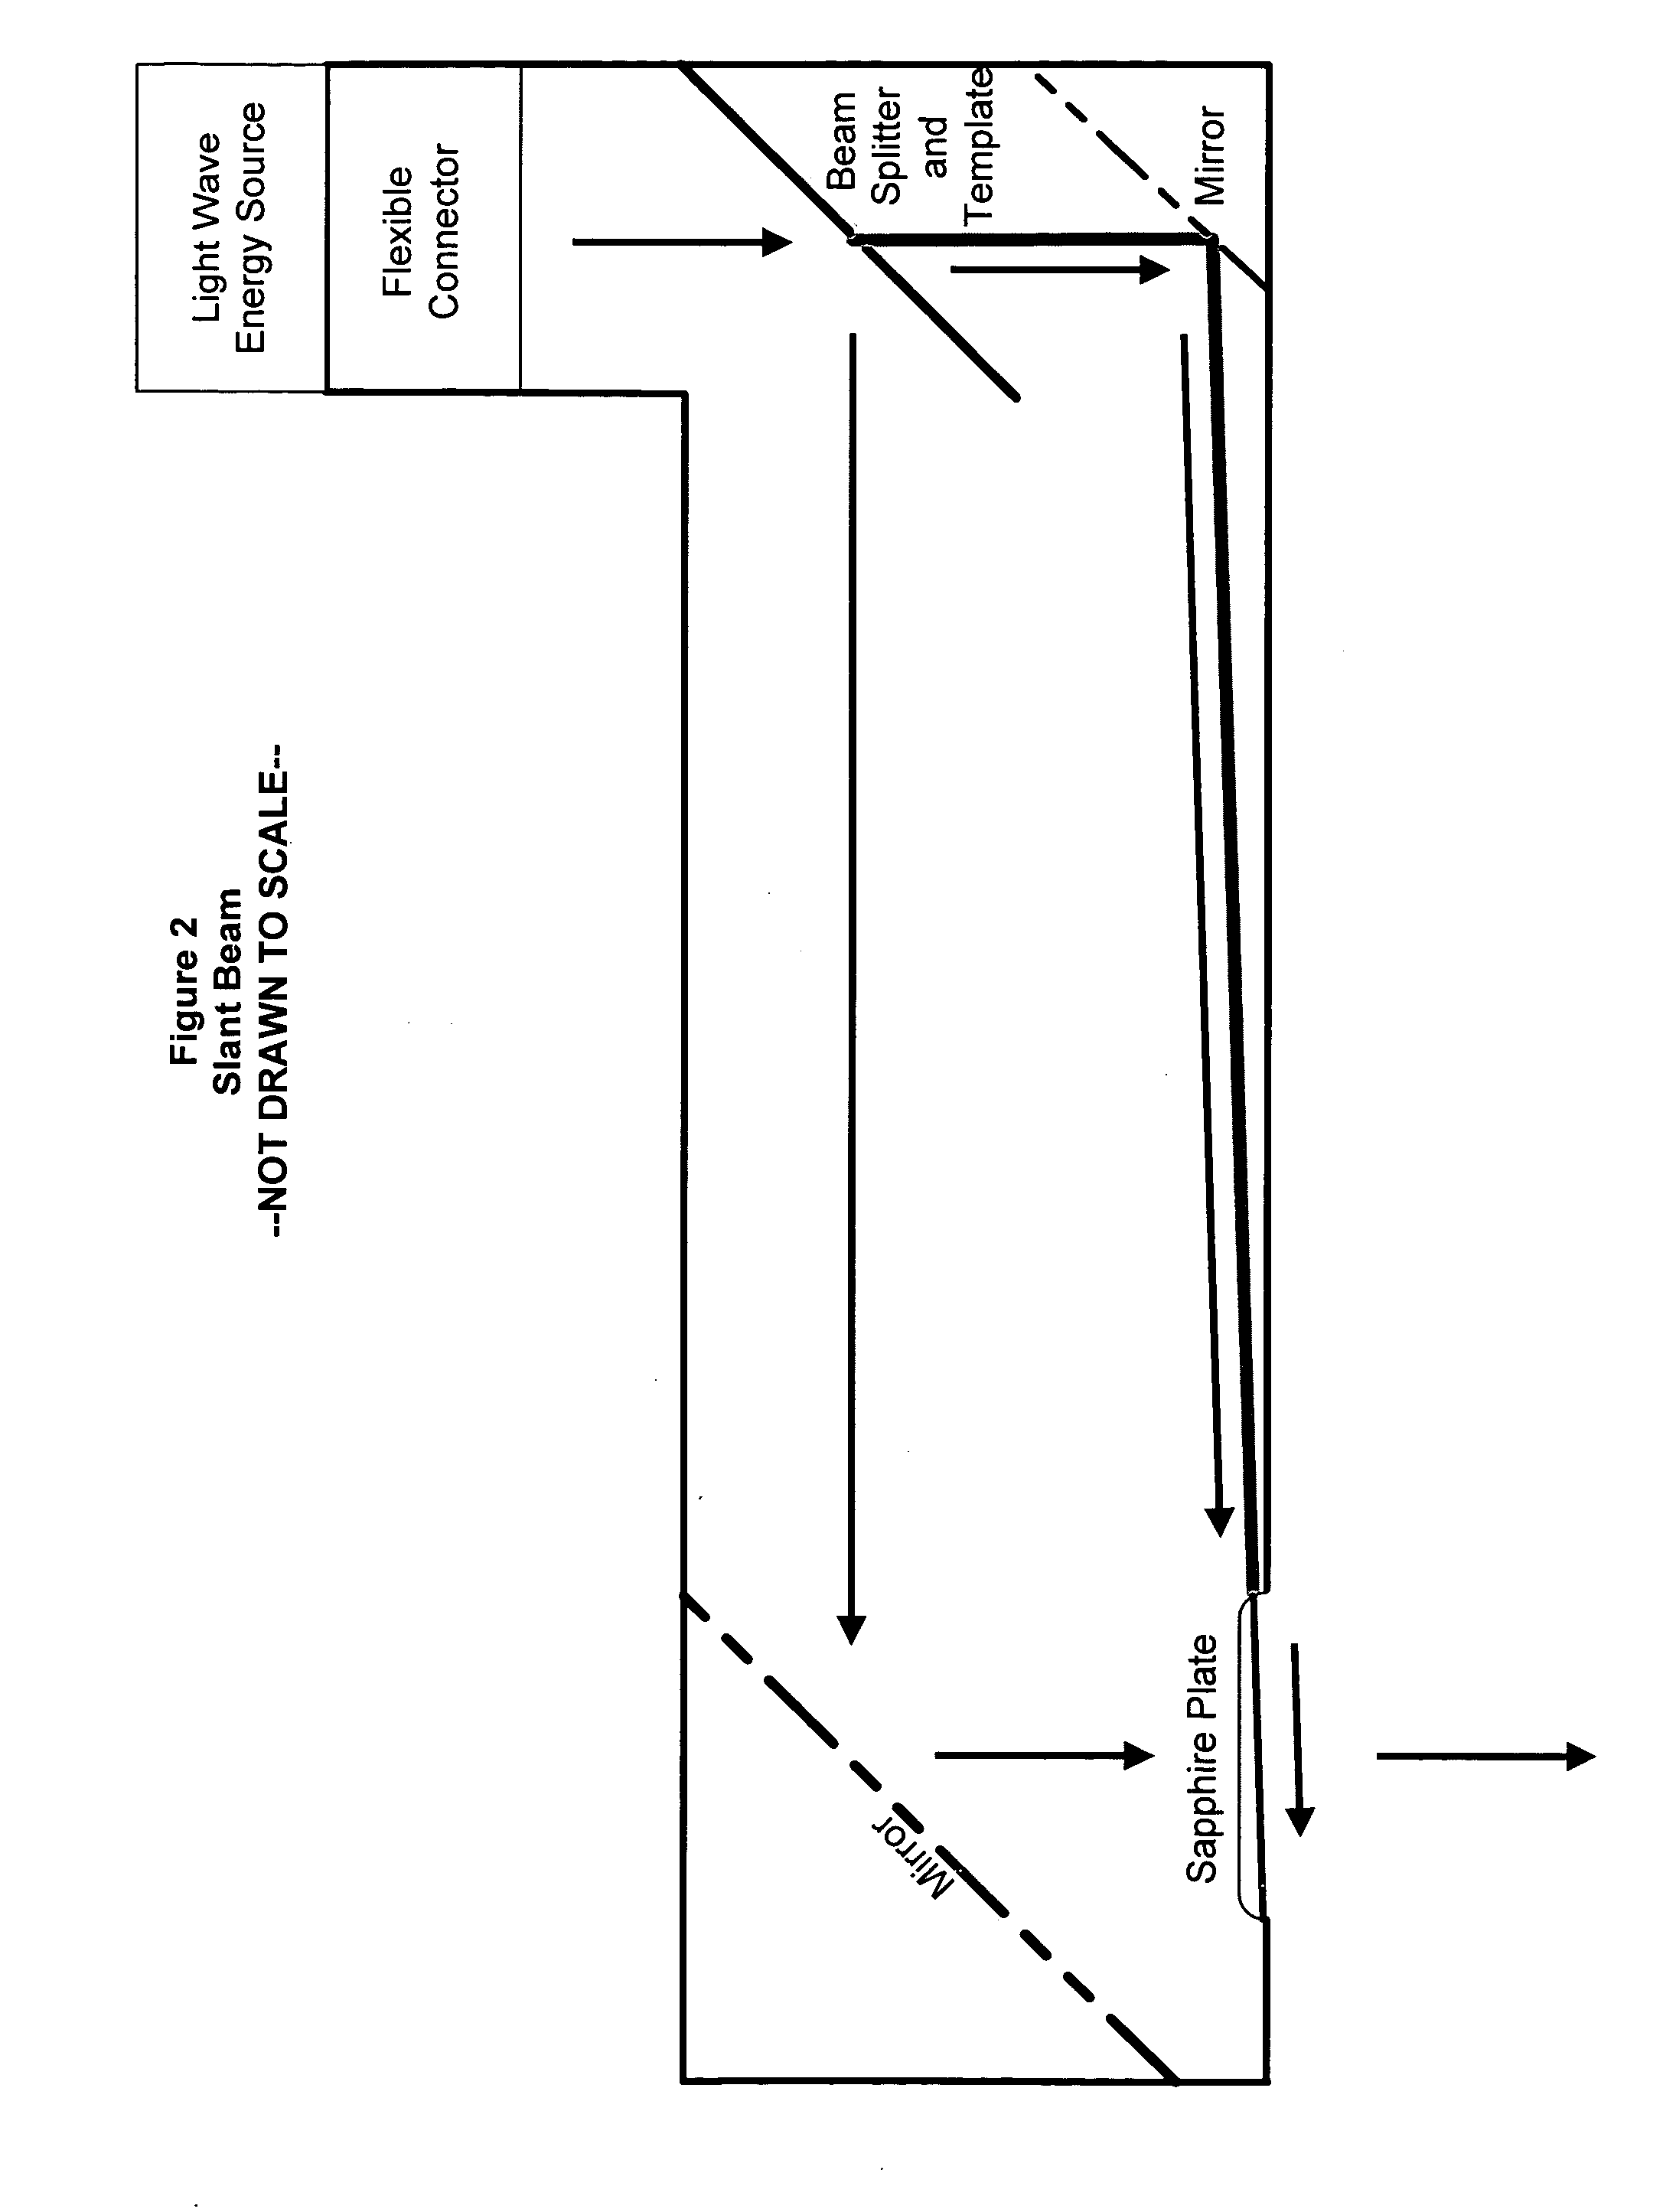 Method and device for dermal retraction and collagen and elastin generation